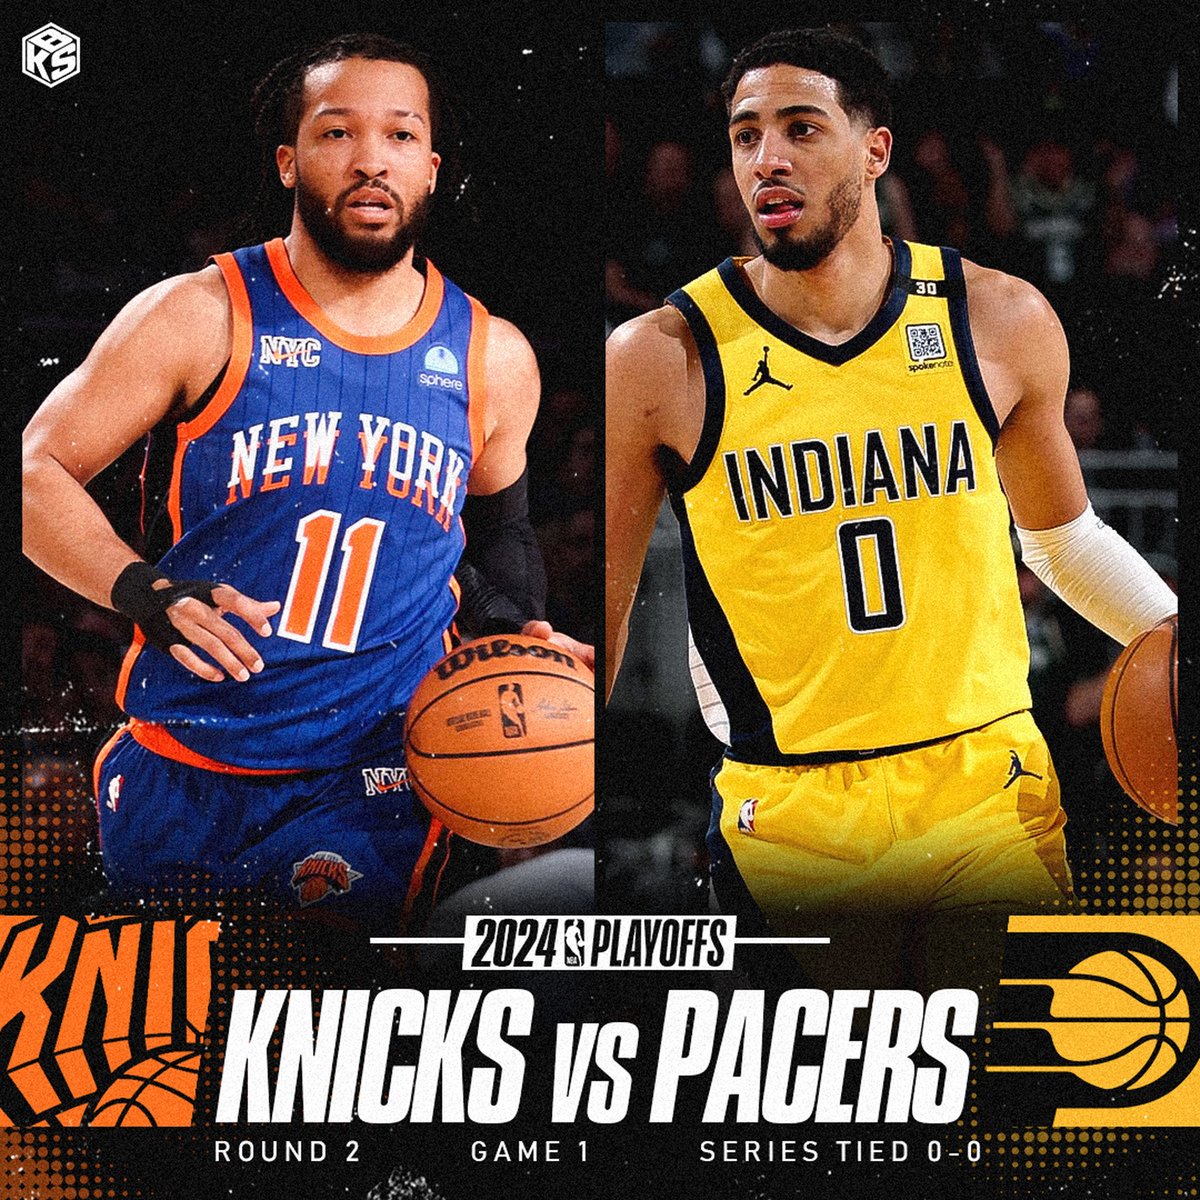 The Knicks host the Pacers to start off the second round of the 2024 NBA Playoffs!

#nba #knicks #newyorkknicks #newyorkforever #knicksnation #knicksbasketball #knickstape #knickerboxscores #nbaplayoffs